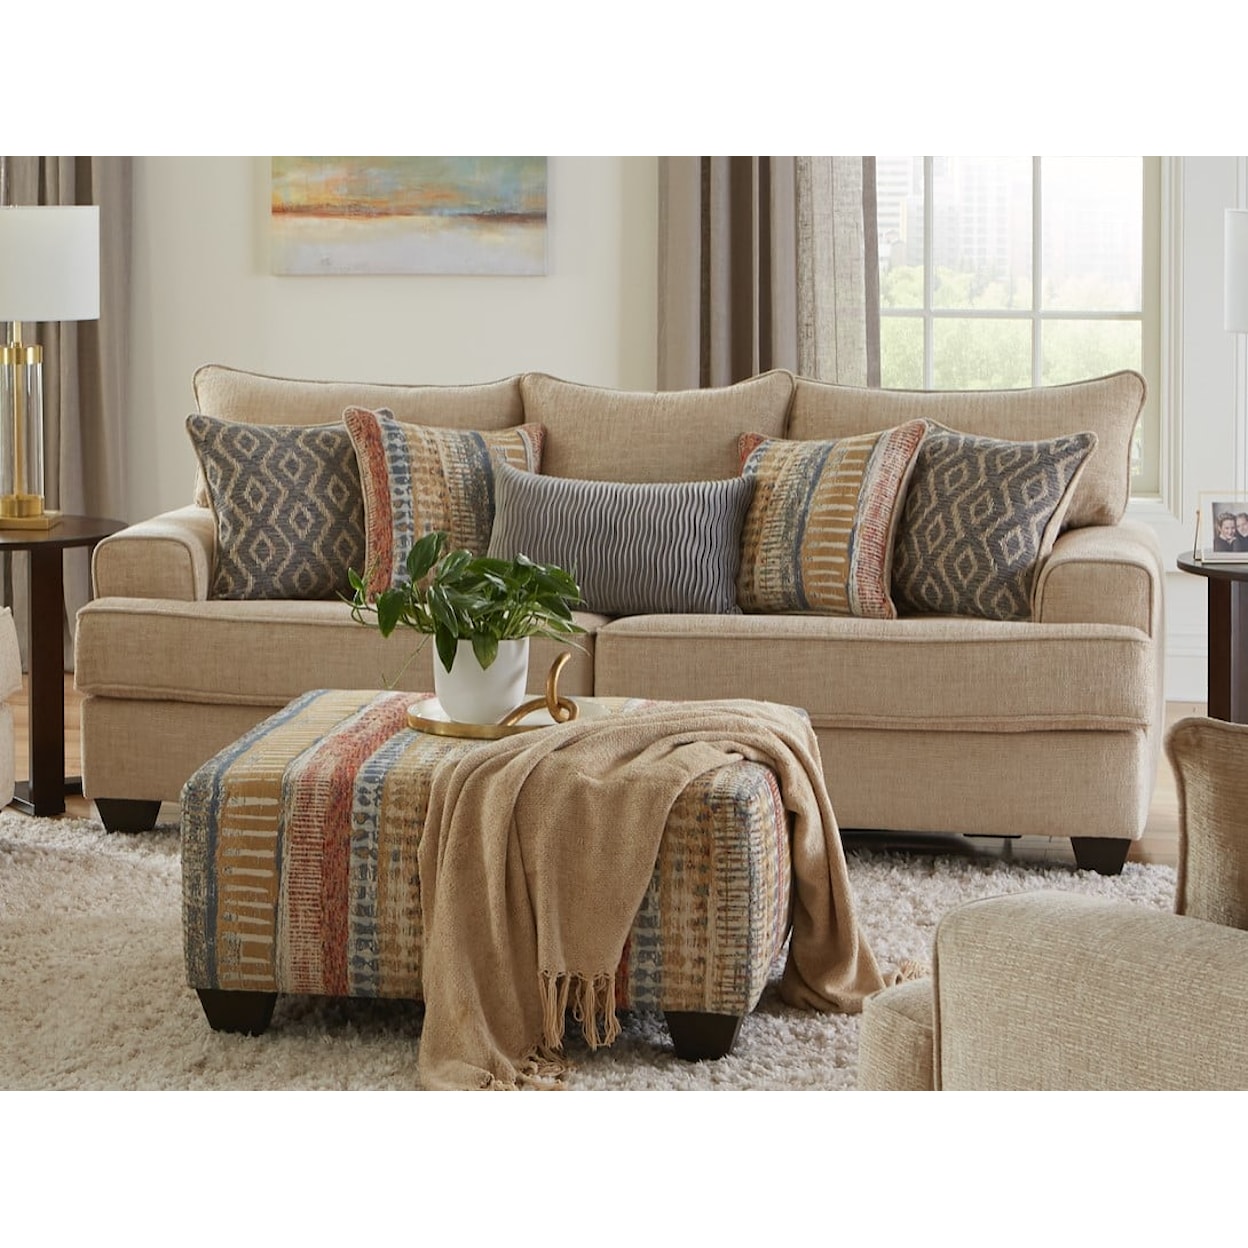 Albany Sandstone Sofa with Accent Pillows